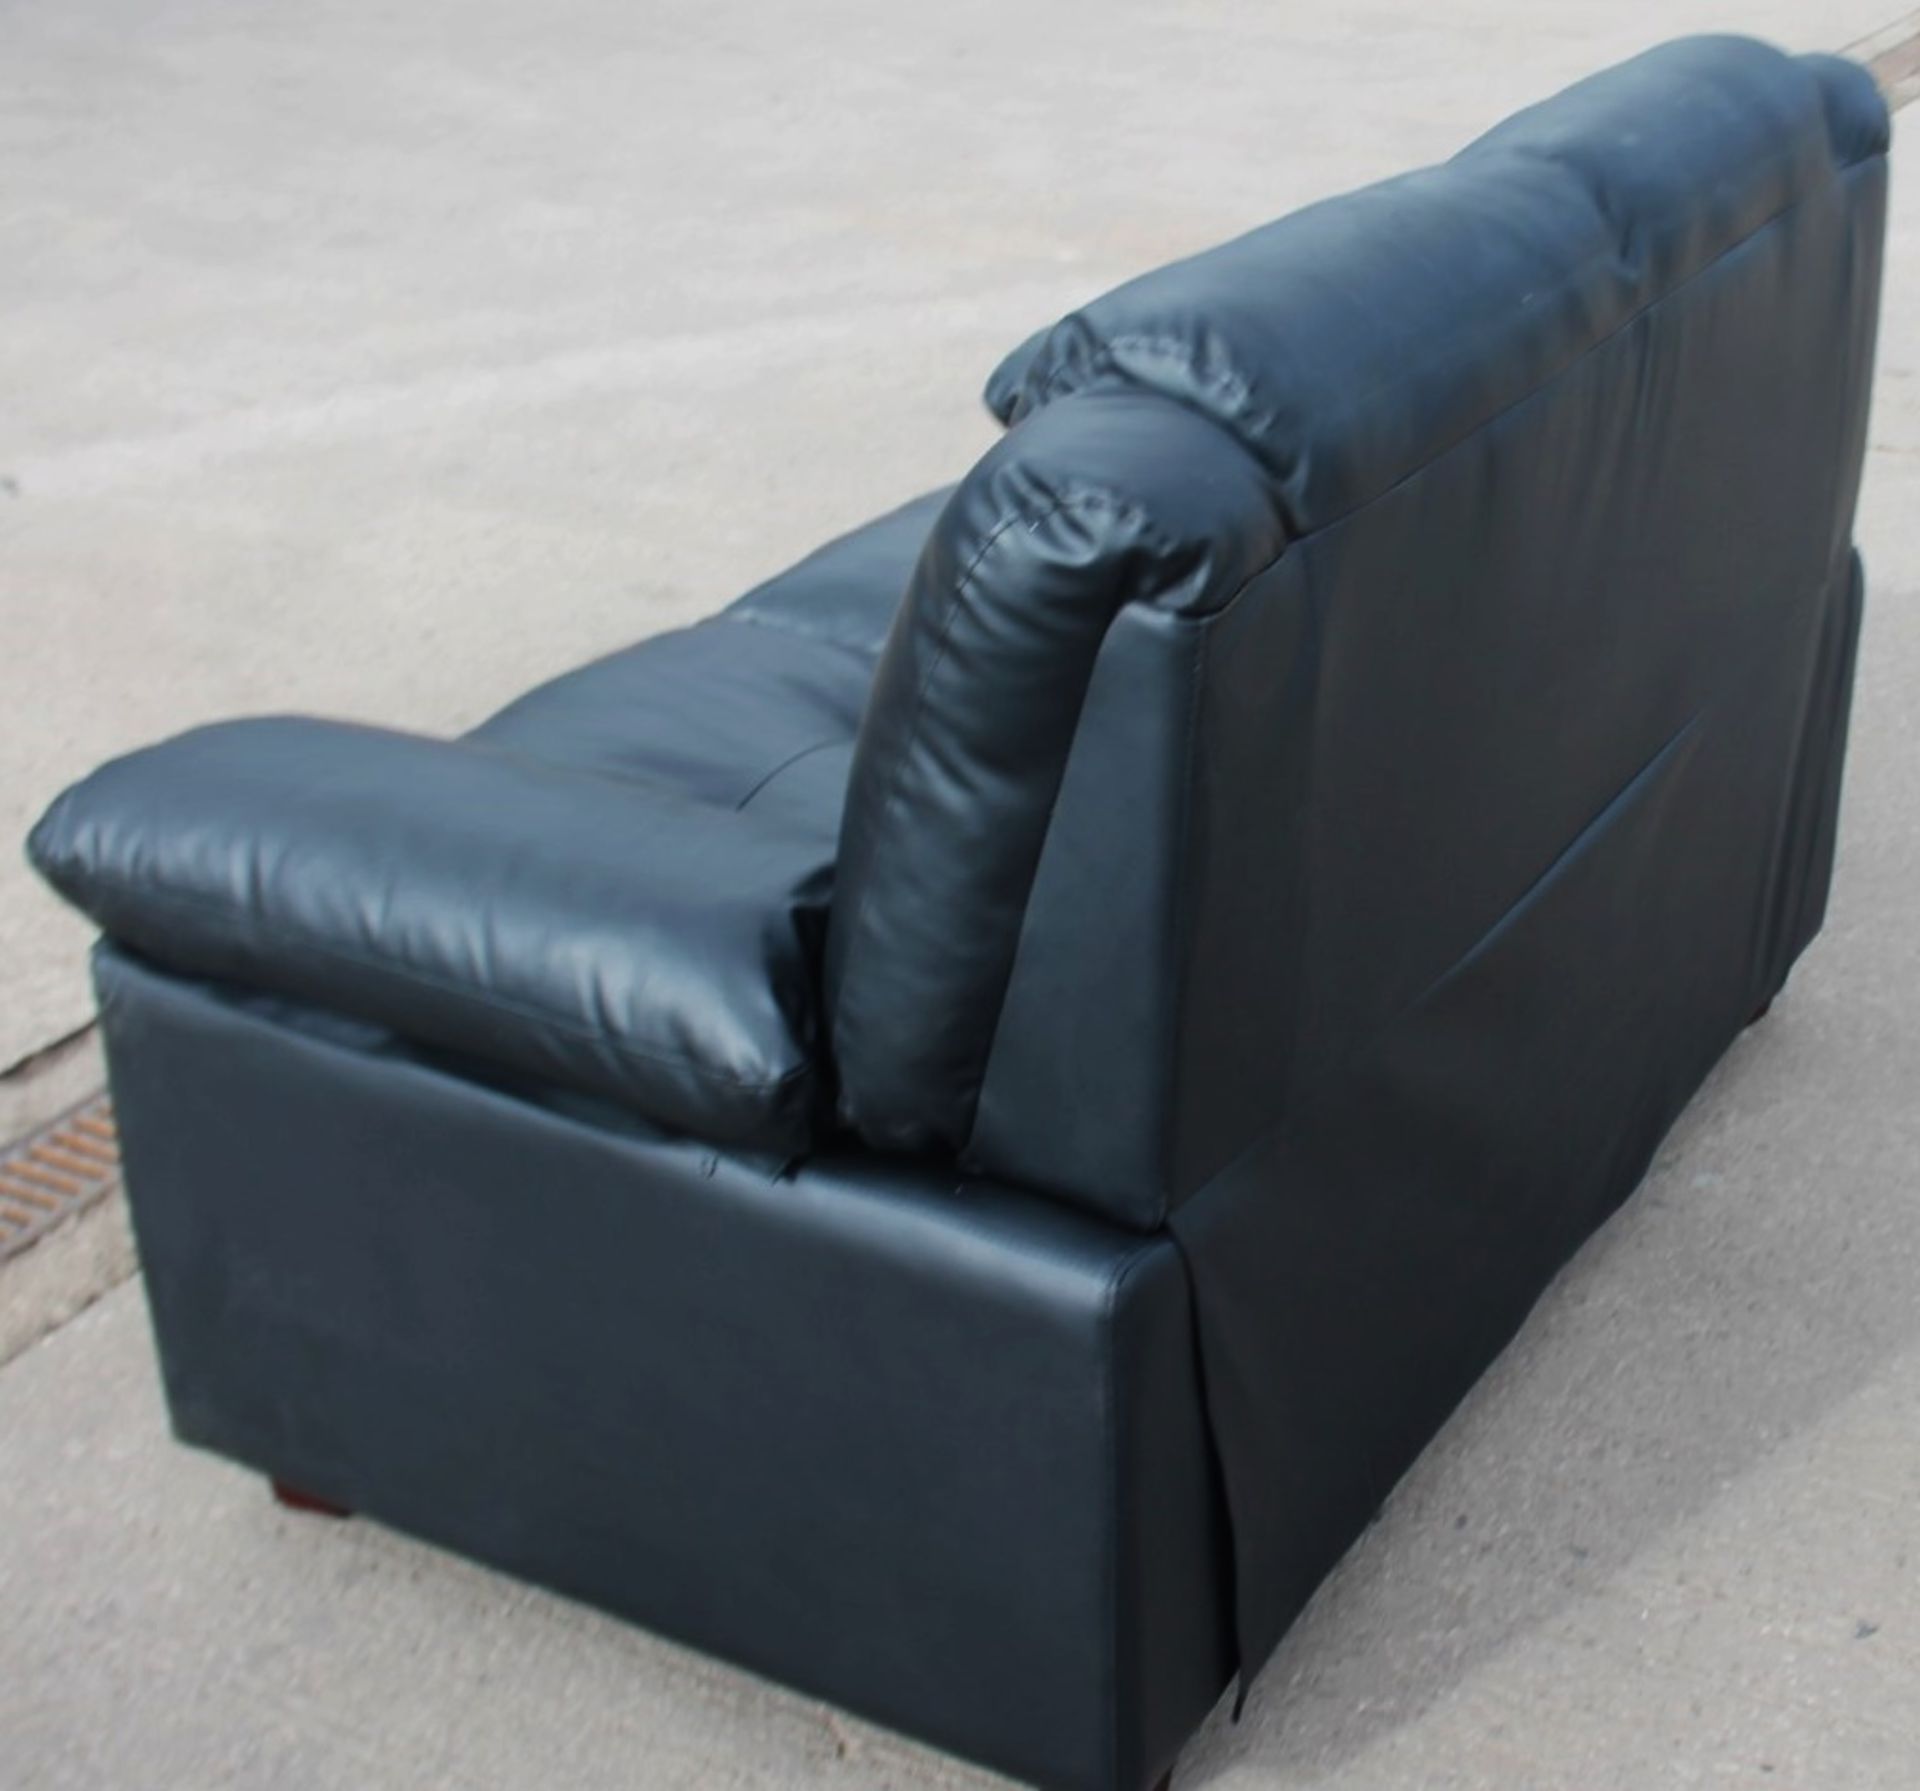 1 x 2-Seater Sofa, Upholstered In A Premium Black Faux Leather - From An Exclusive Property - NO VAT - Image 4 of 4